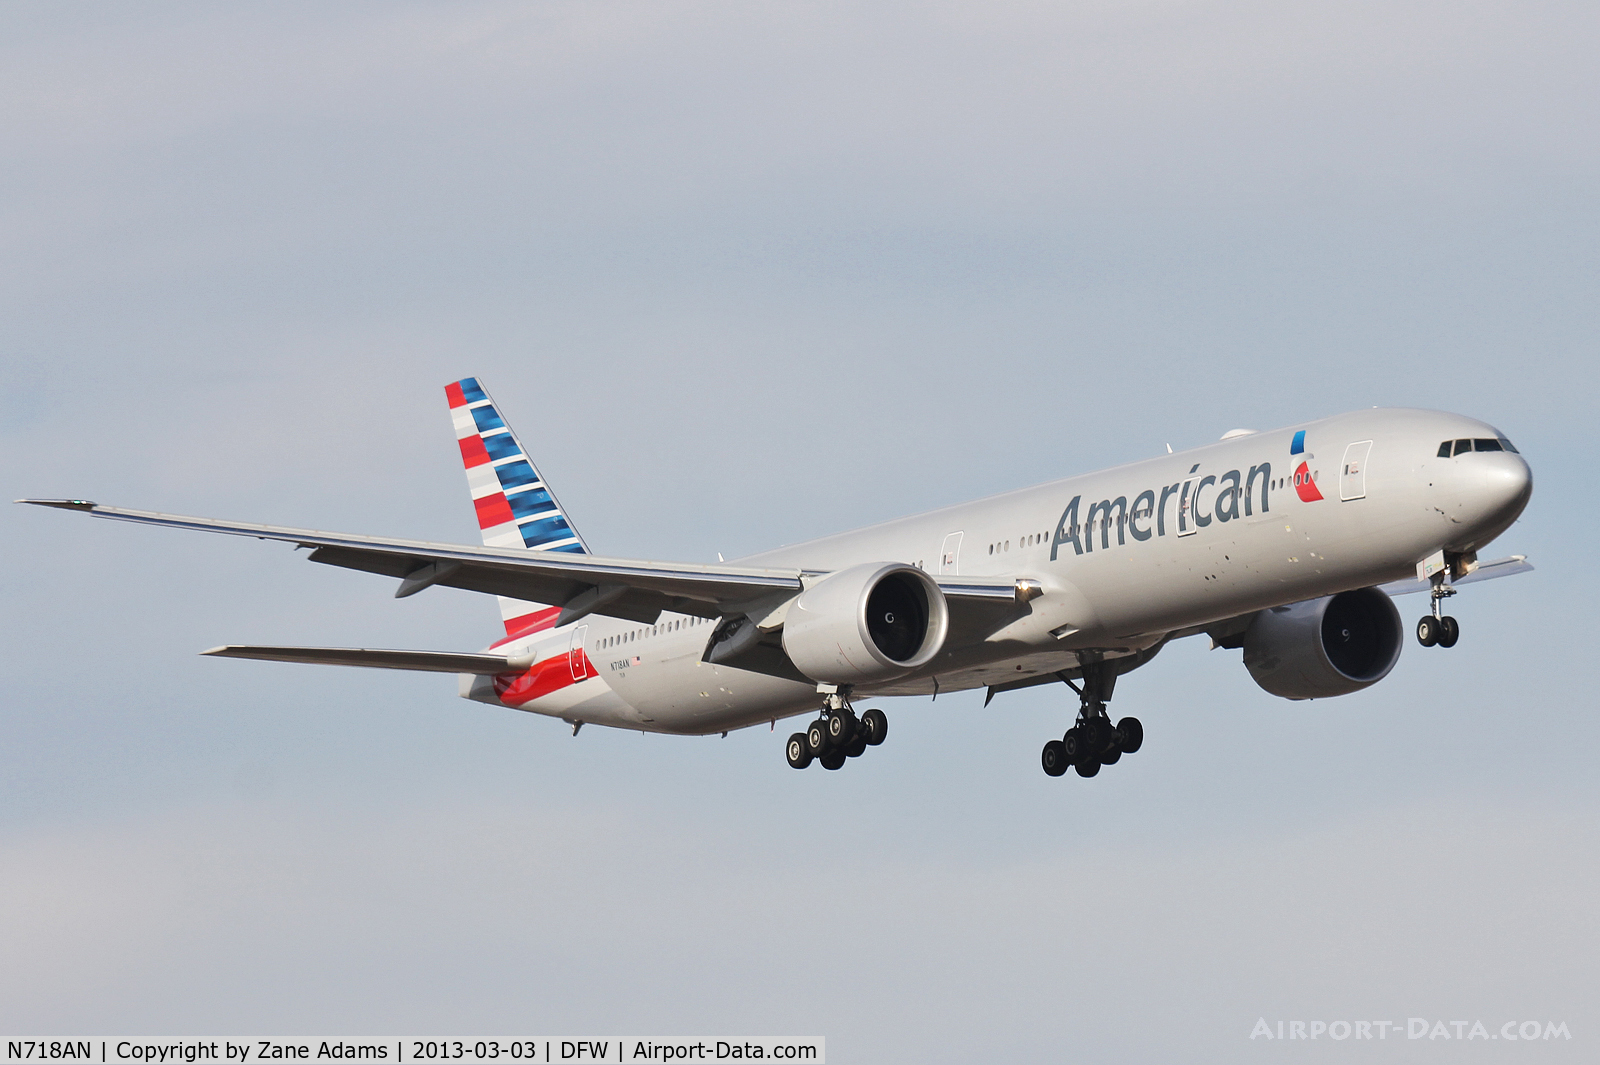 N718AN, 2012 Boeing 777-323/ER C/N 41665, New American Airlines livery 777-300 landing at DFW Airport.